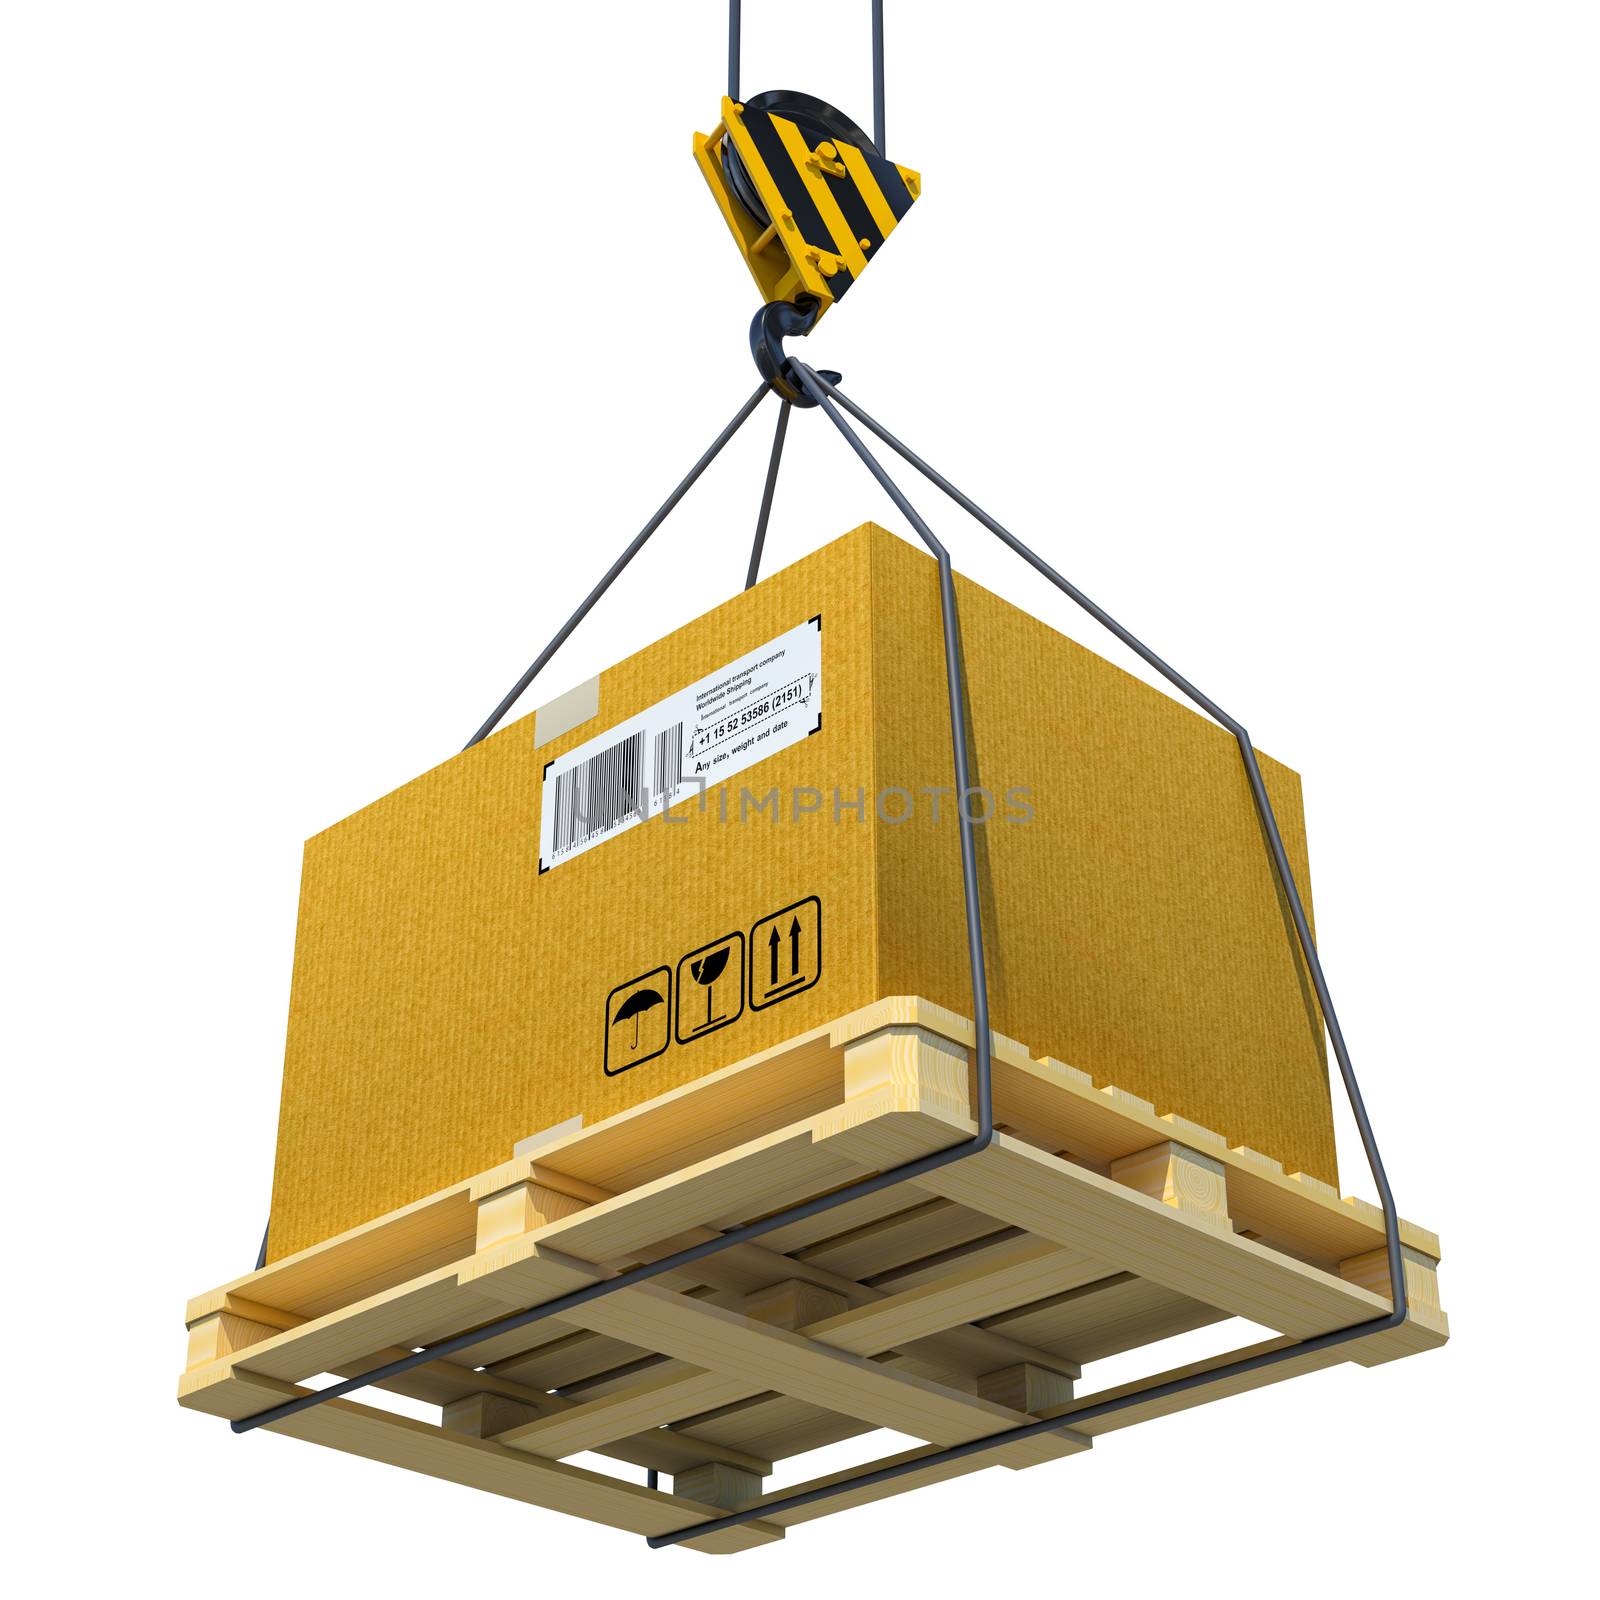 Pallet with cardboard lifted by crane. 3d illustration